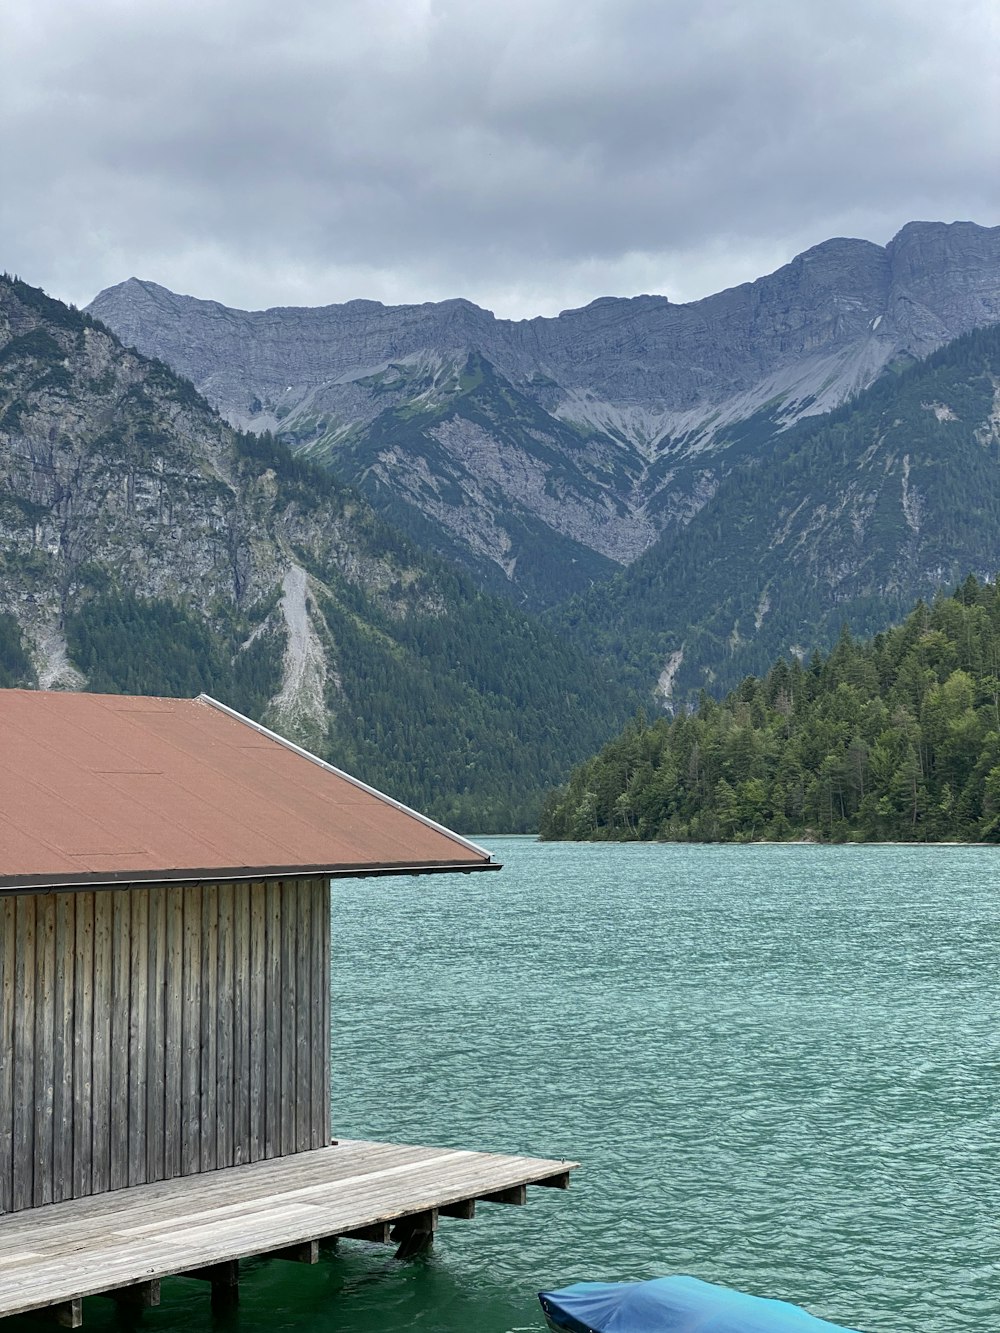 a wooden dock sitting next to a lake with mountains in the background